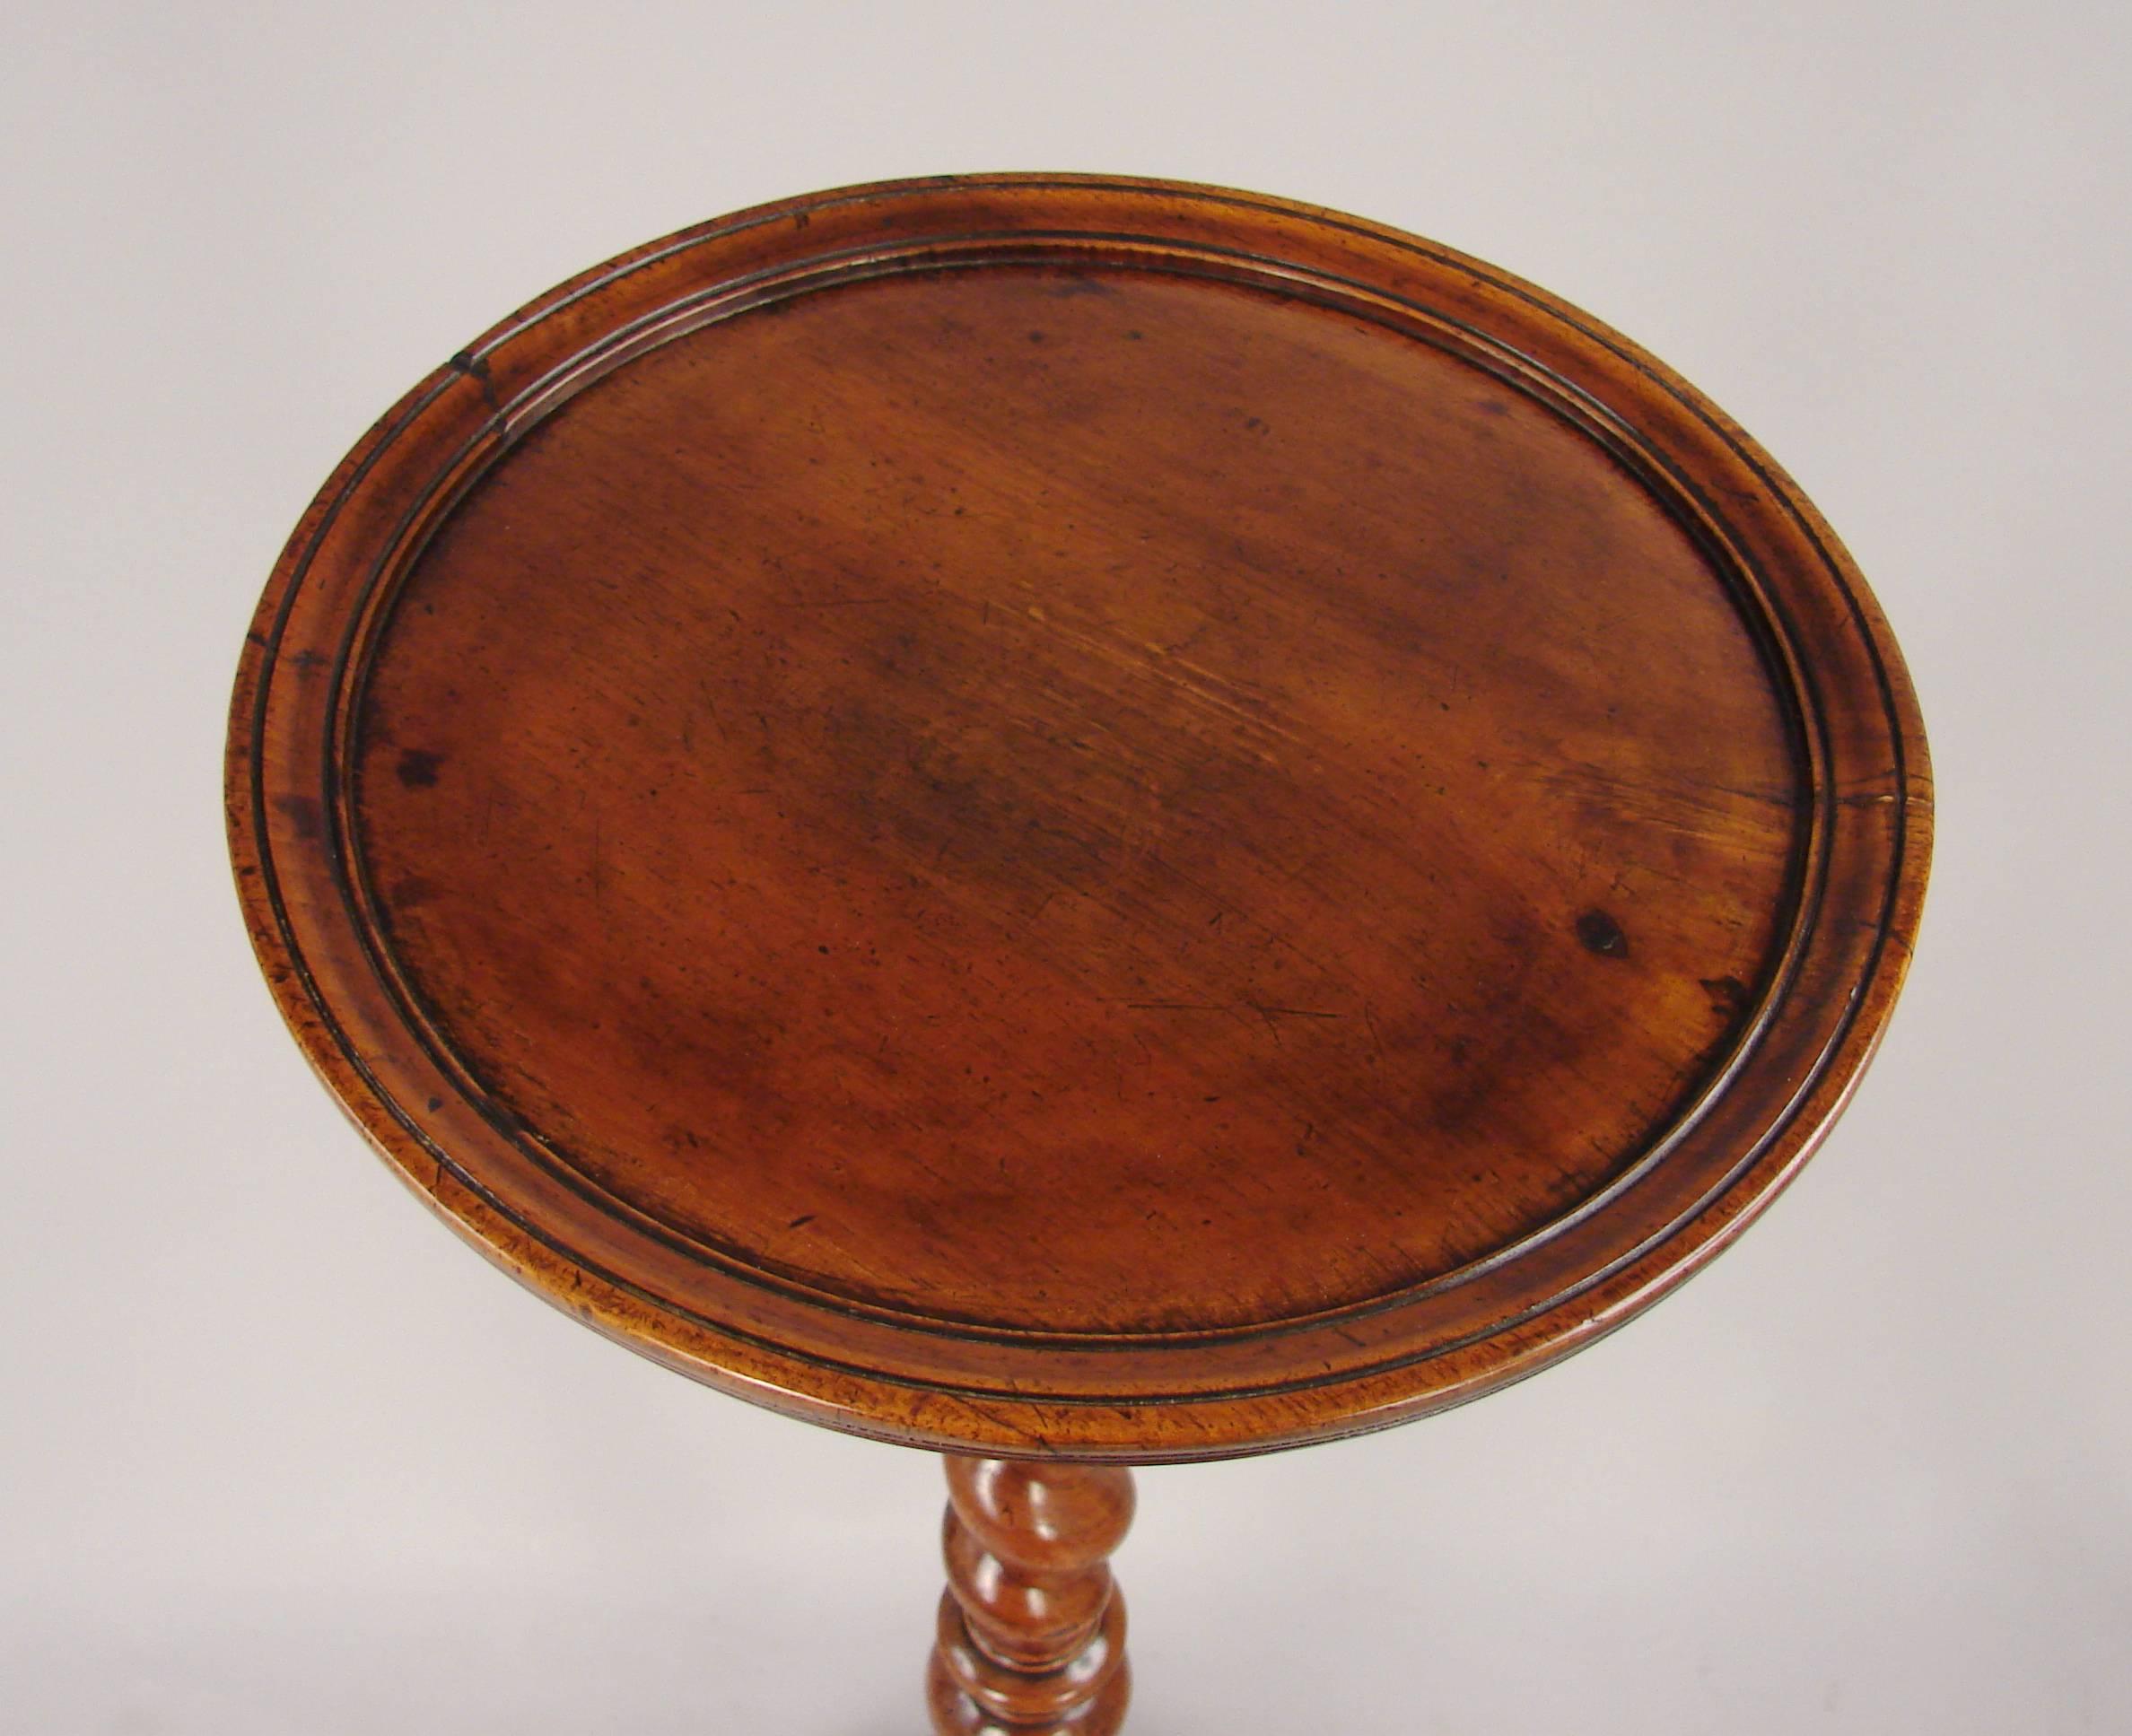 English William and Mary Walnut Candle Stand